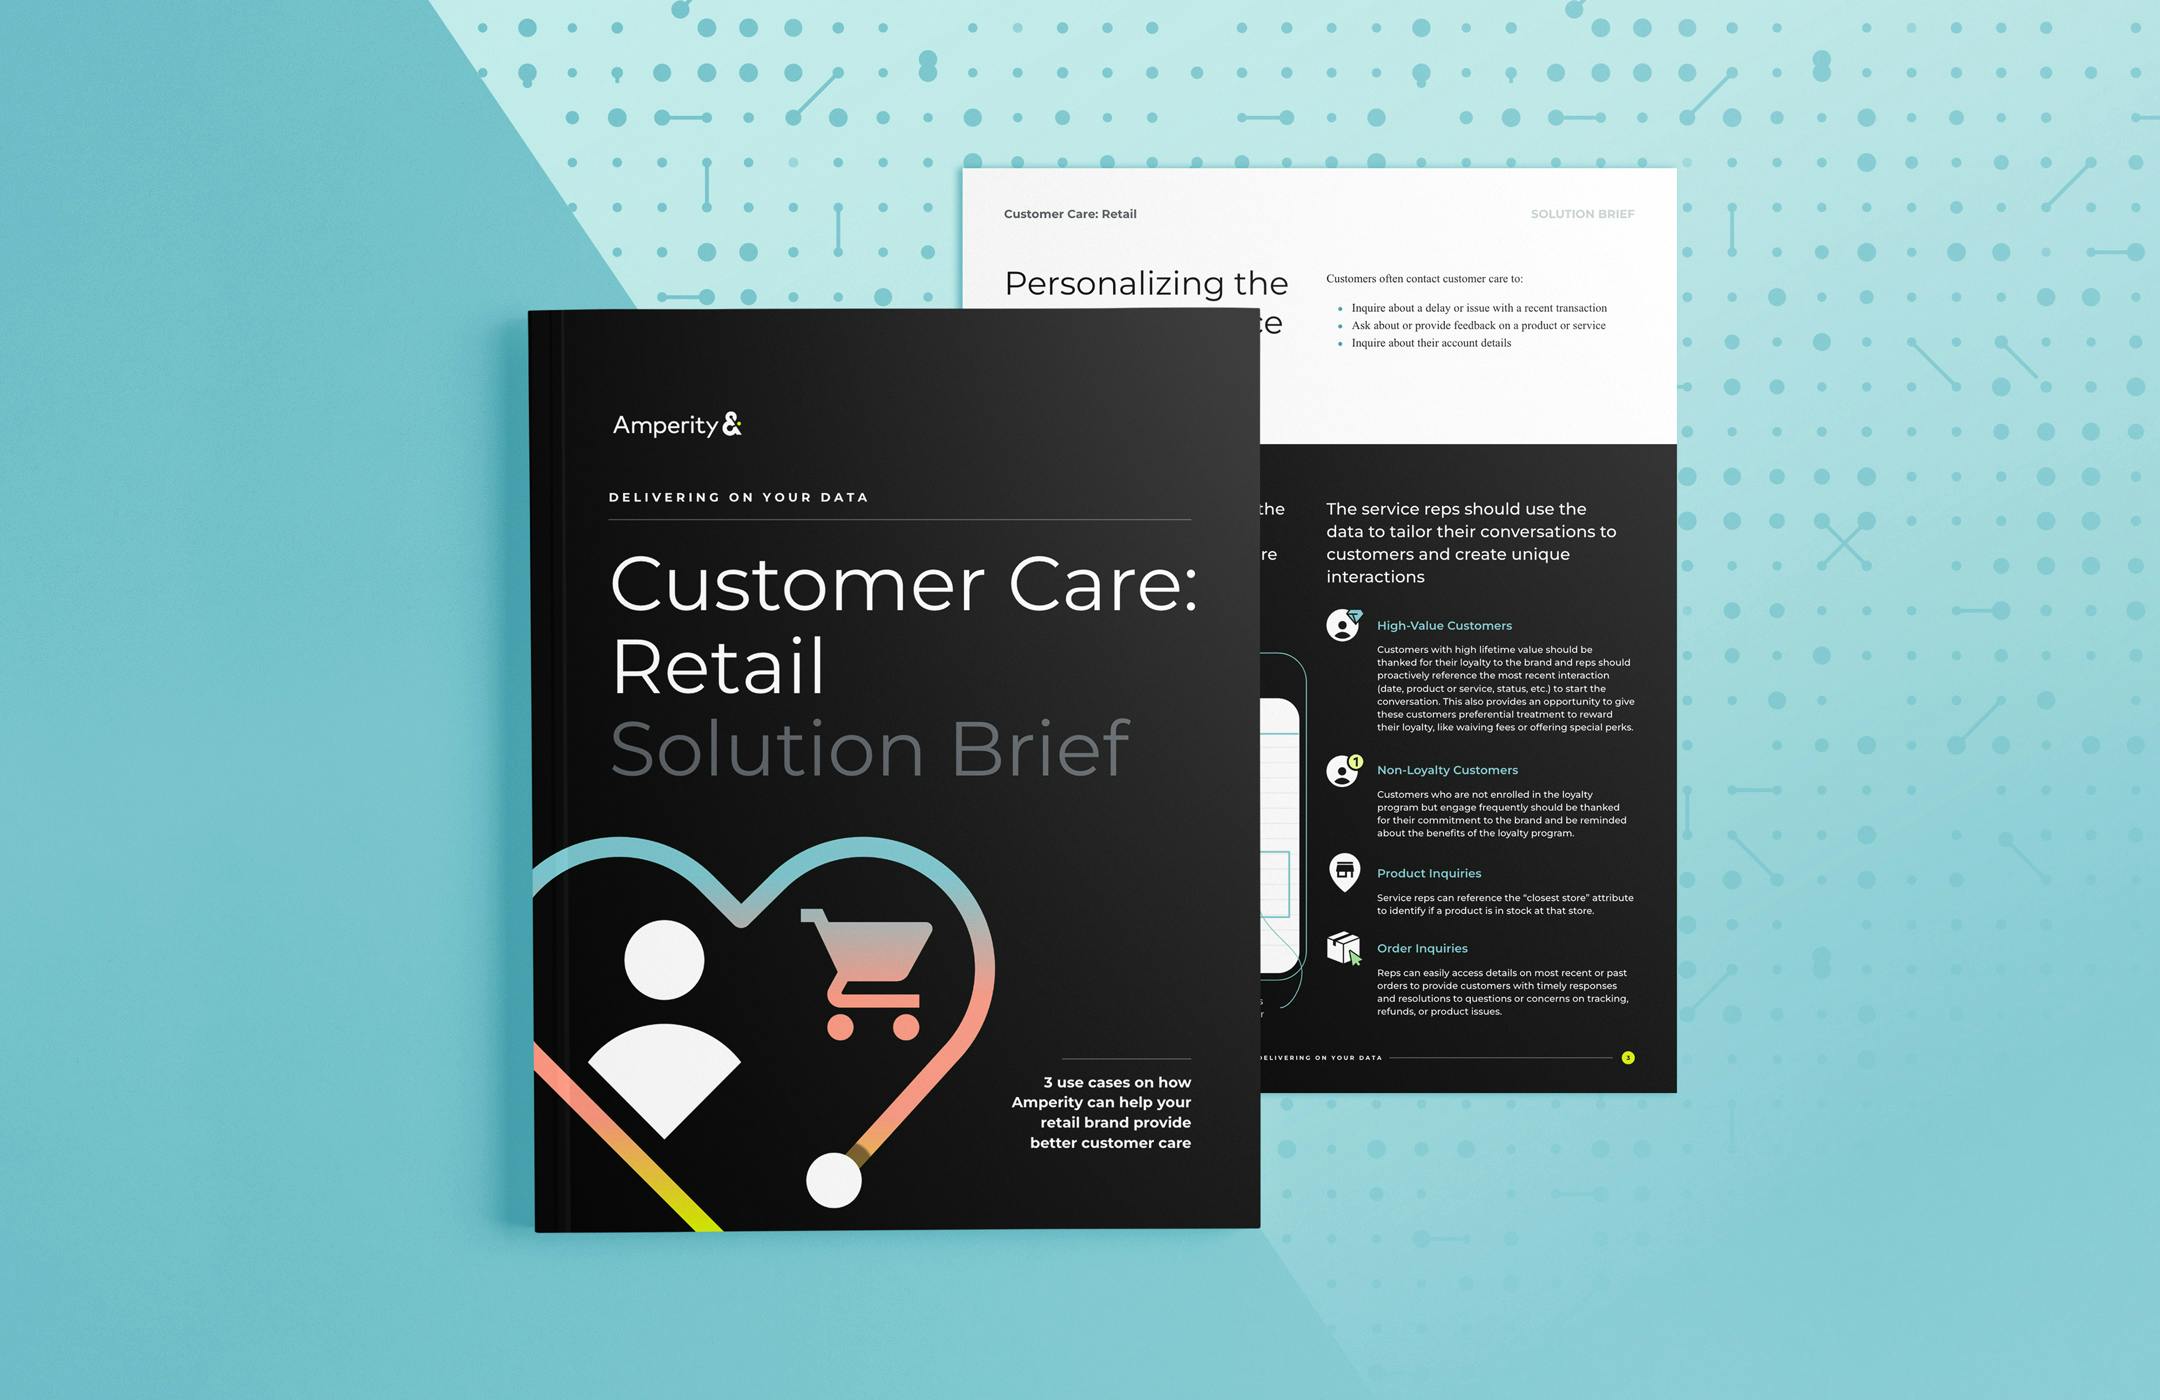 Preview image of the Customer Care for Retail Solution Brief